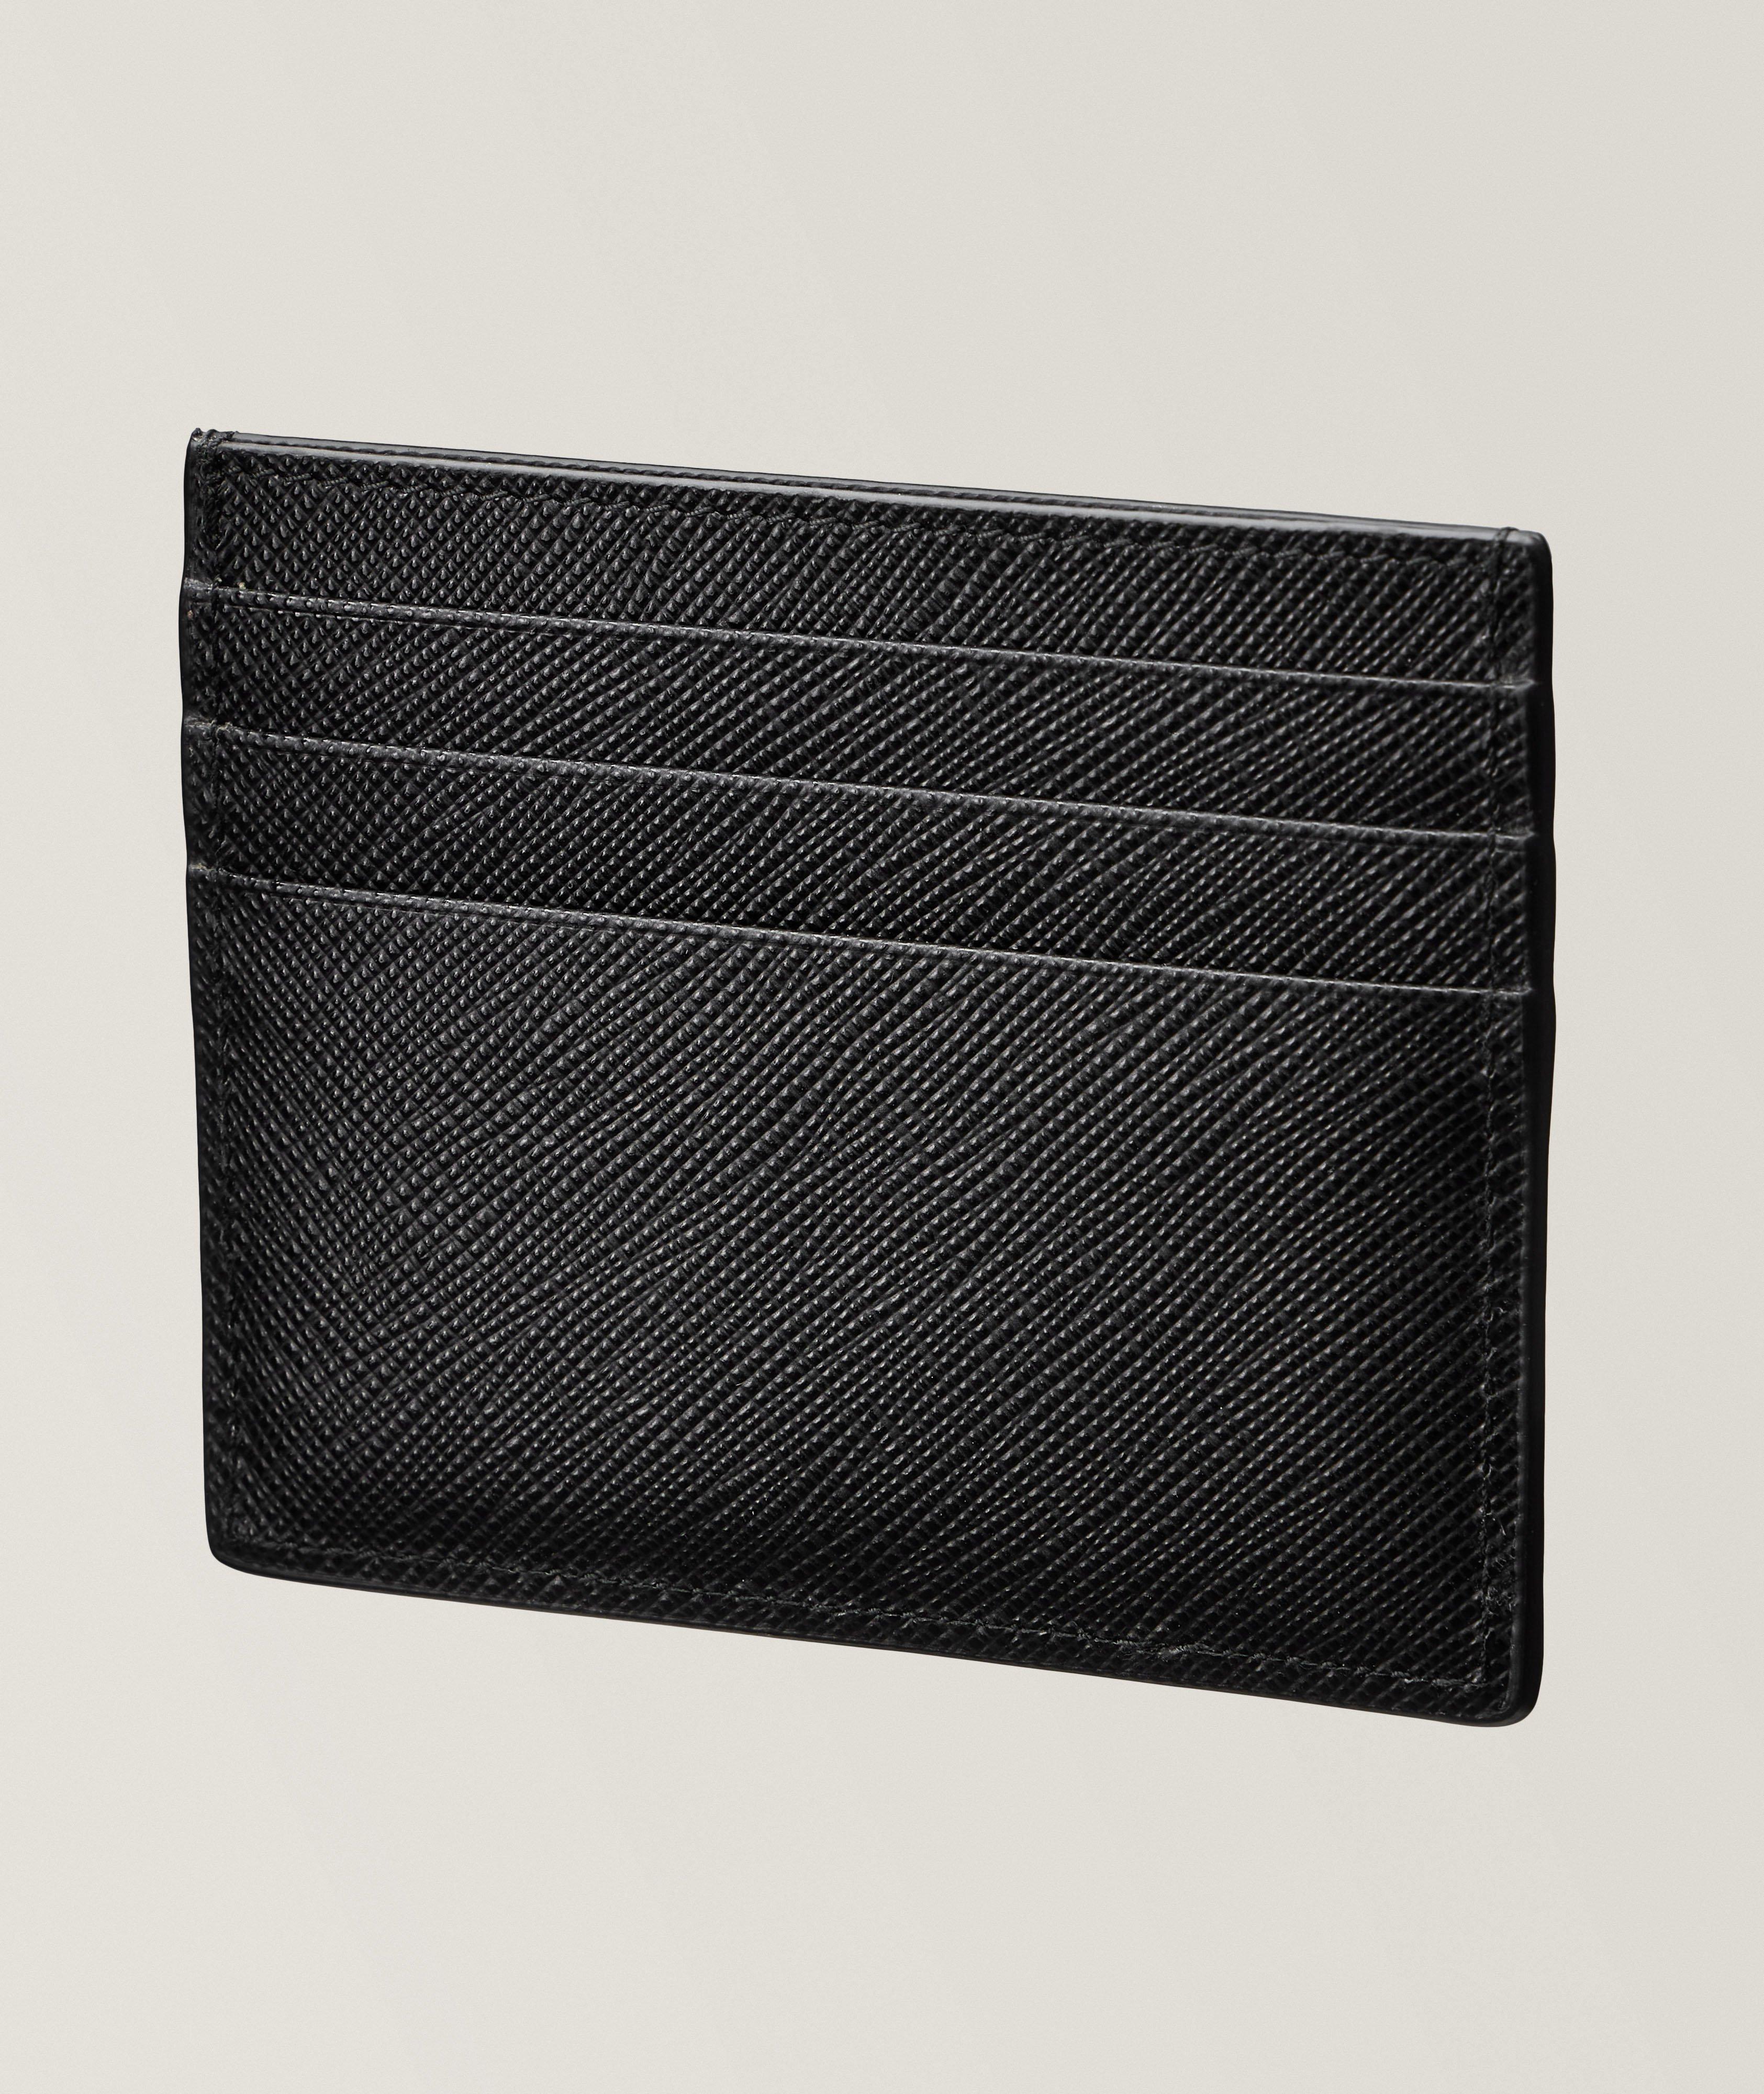 Textured Saffiano Leather Cardholder image 1